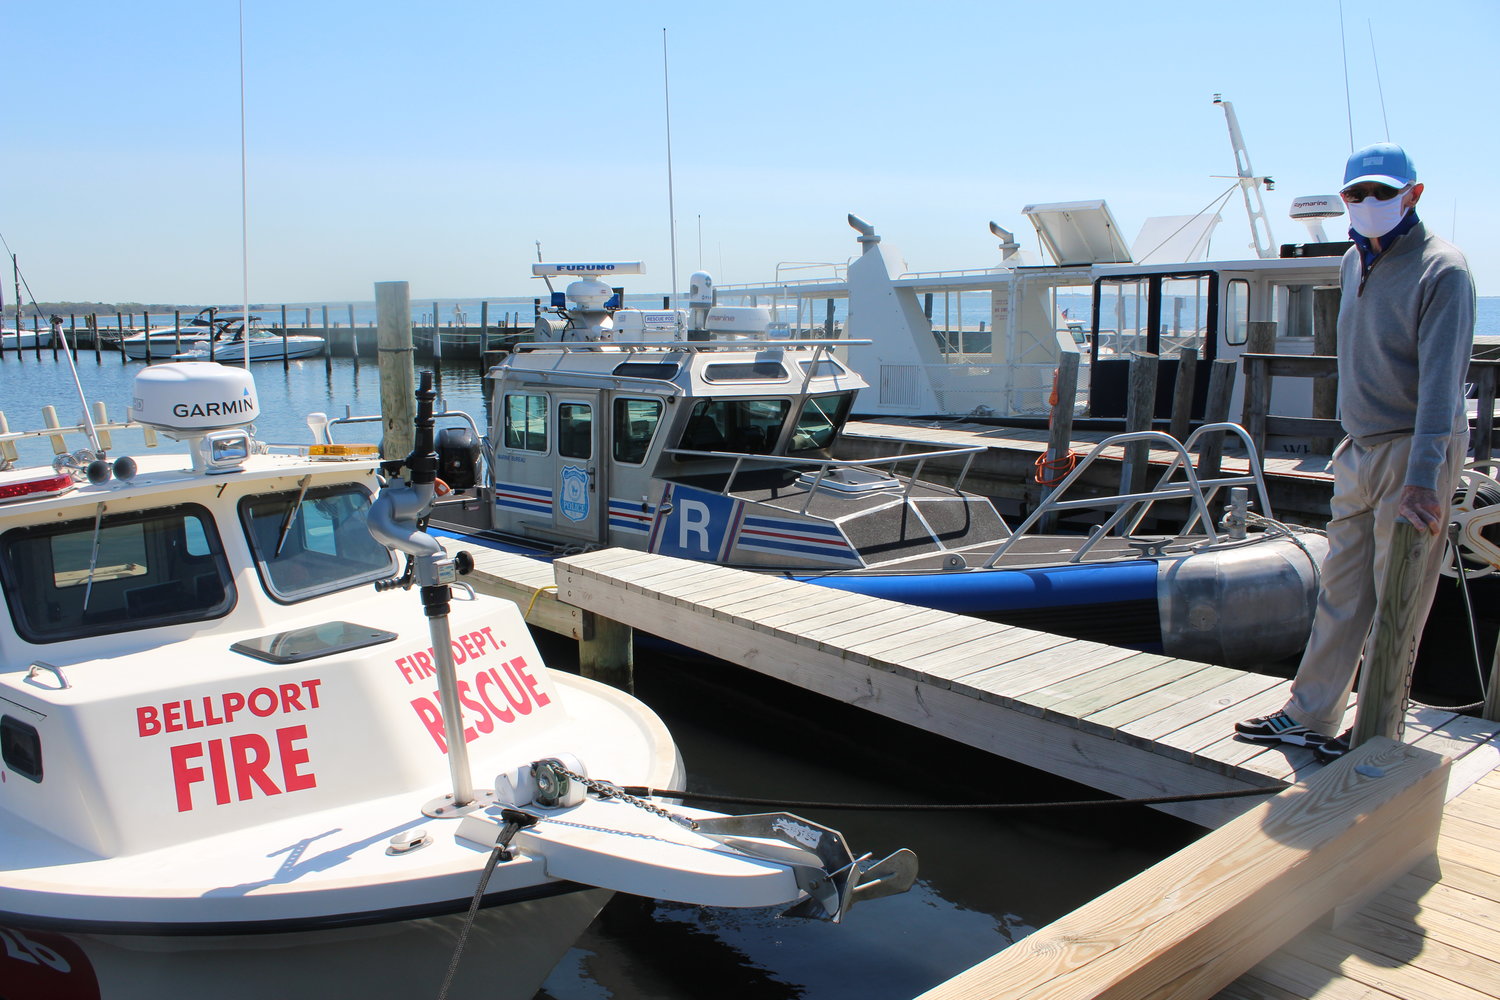 Bellport mayor Ray Fell stands by the Bellport Fire Department and Suffolk County Police Marine Unit boats. Federal funds requested would strengthen the dock’s points of departure for both agencies as well as South Country Ambulance in emergencies.